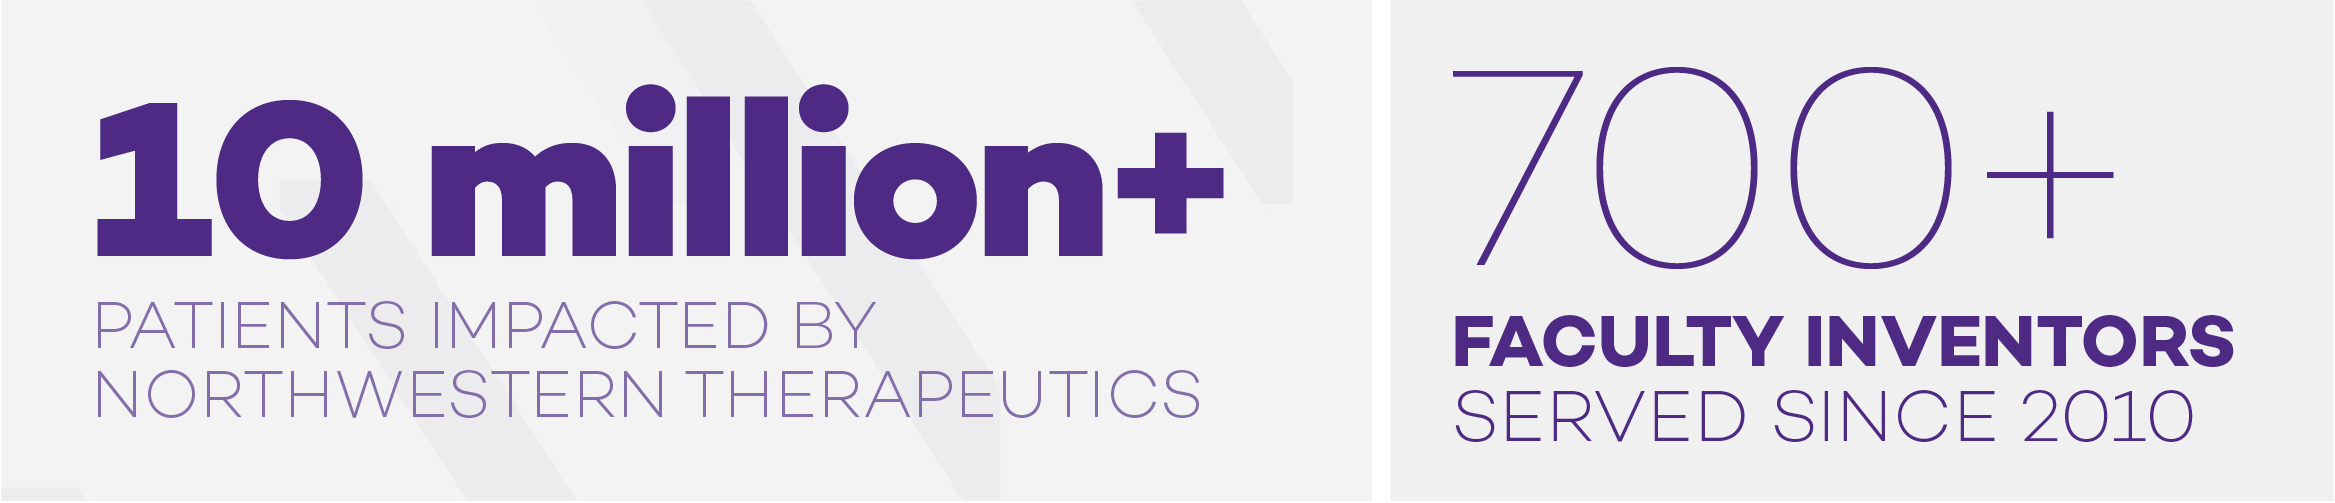 10 million+ patients impacted by Northwestern Therapeutics.  700+ faculty inventors served since 2010.